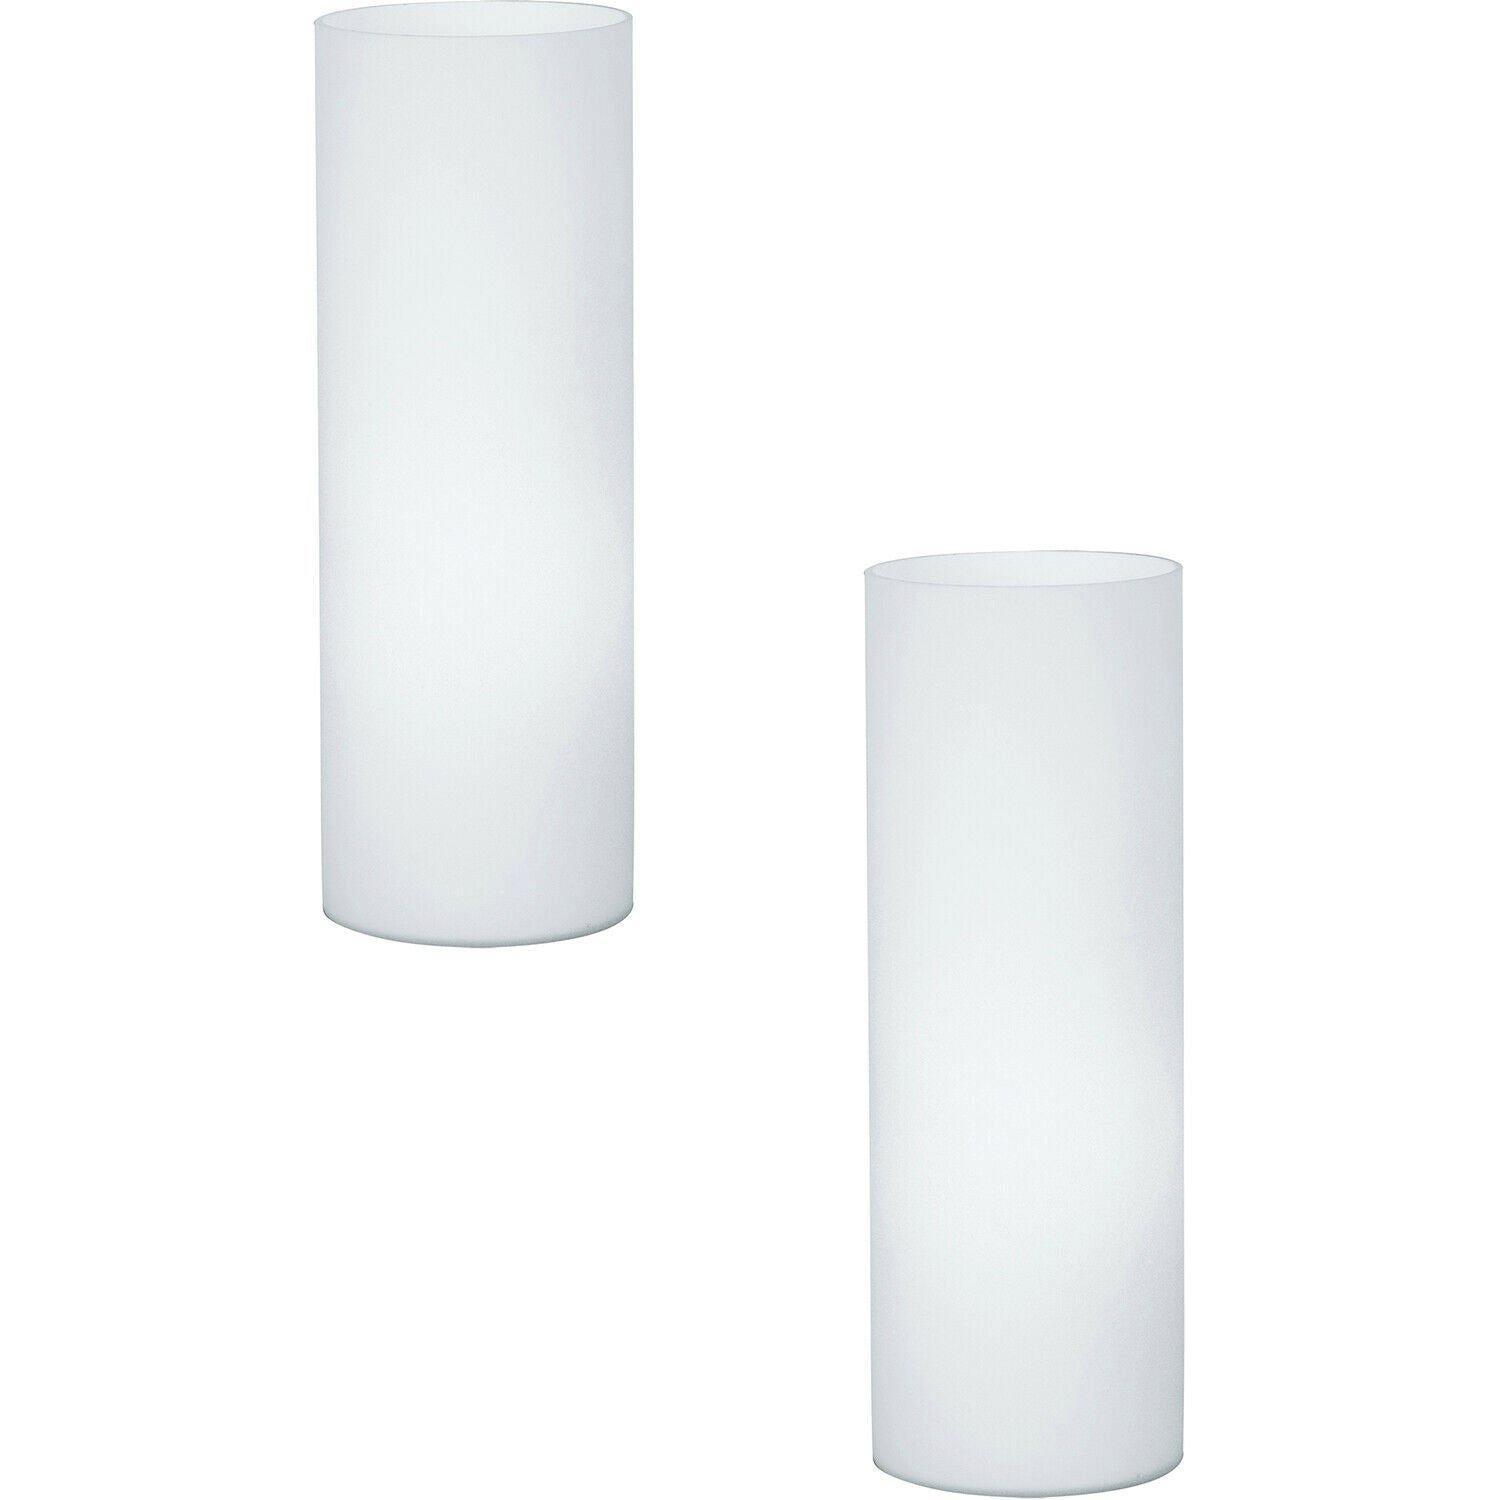 2 PACK Table Lamp Colour Shade White Glass Opal Matt In Line Switch E27 1x60W